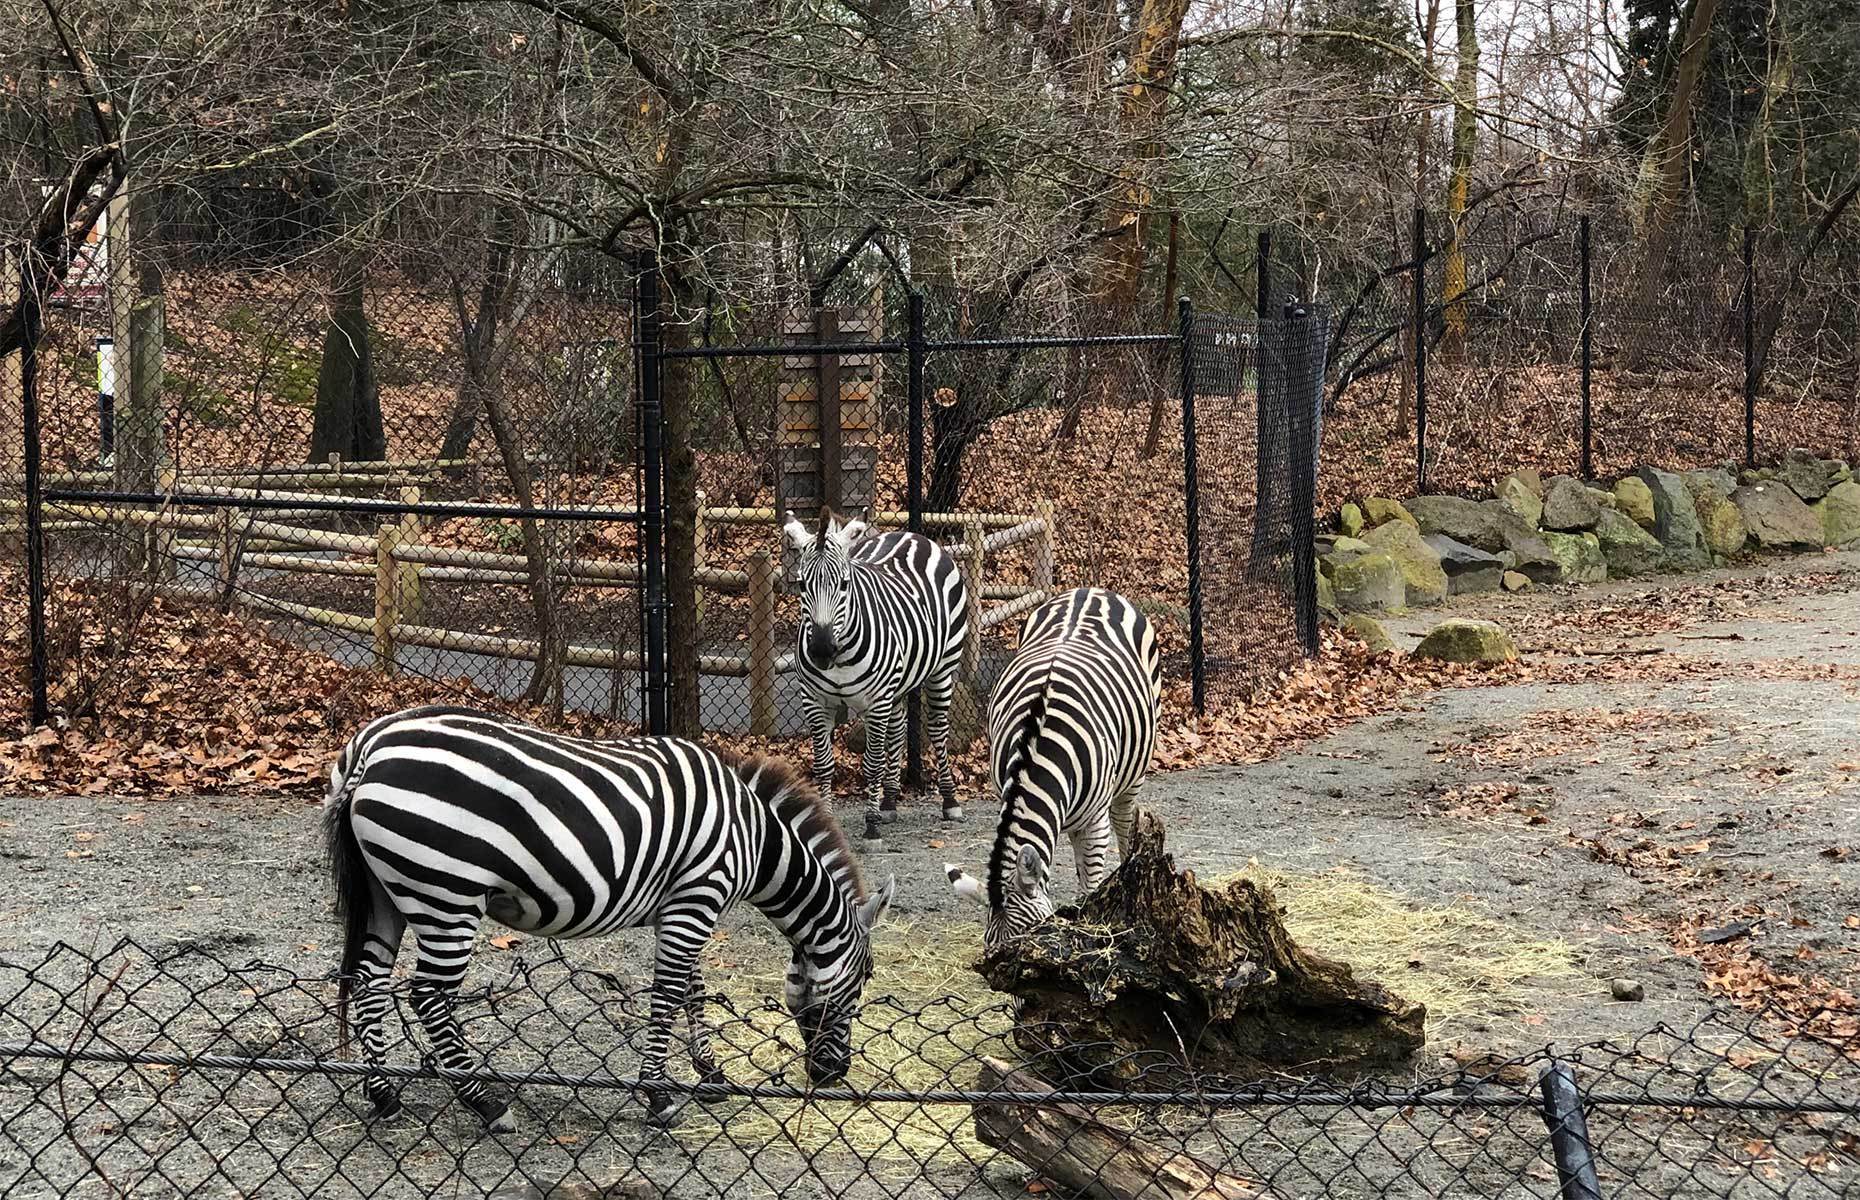 <p class="p1"><span>To catch a glimpse of giraffes, lions, zebras, a Komodo dragon, red pandas, and lots of <a href="http://www.rwpzoo.org/" rel="noreferrer noopener"><span>other animals</span></a>, stop by Providence’s Roger Williams Park Zoo. </span></p>